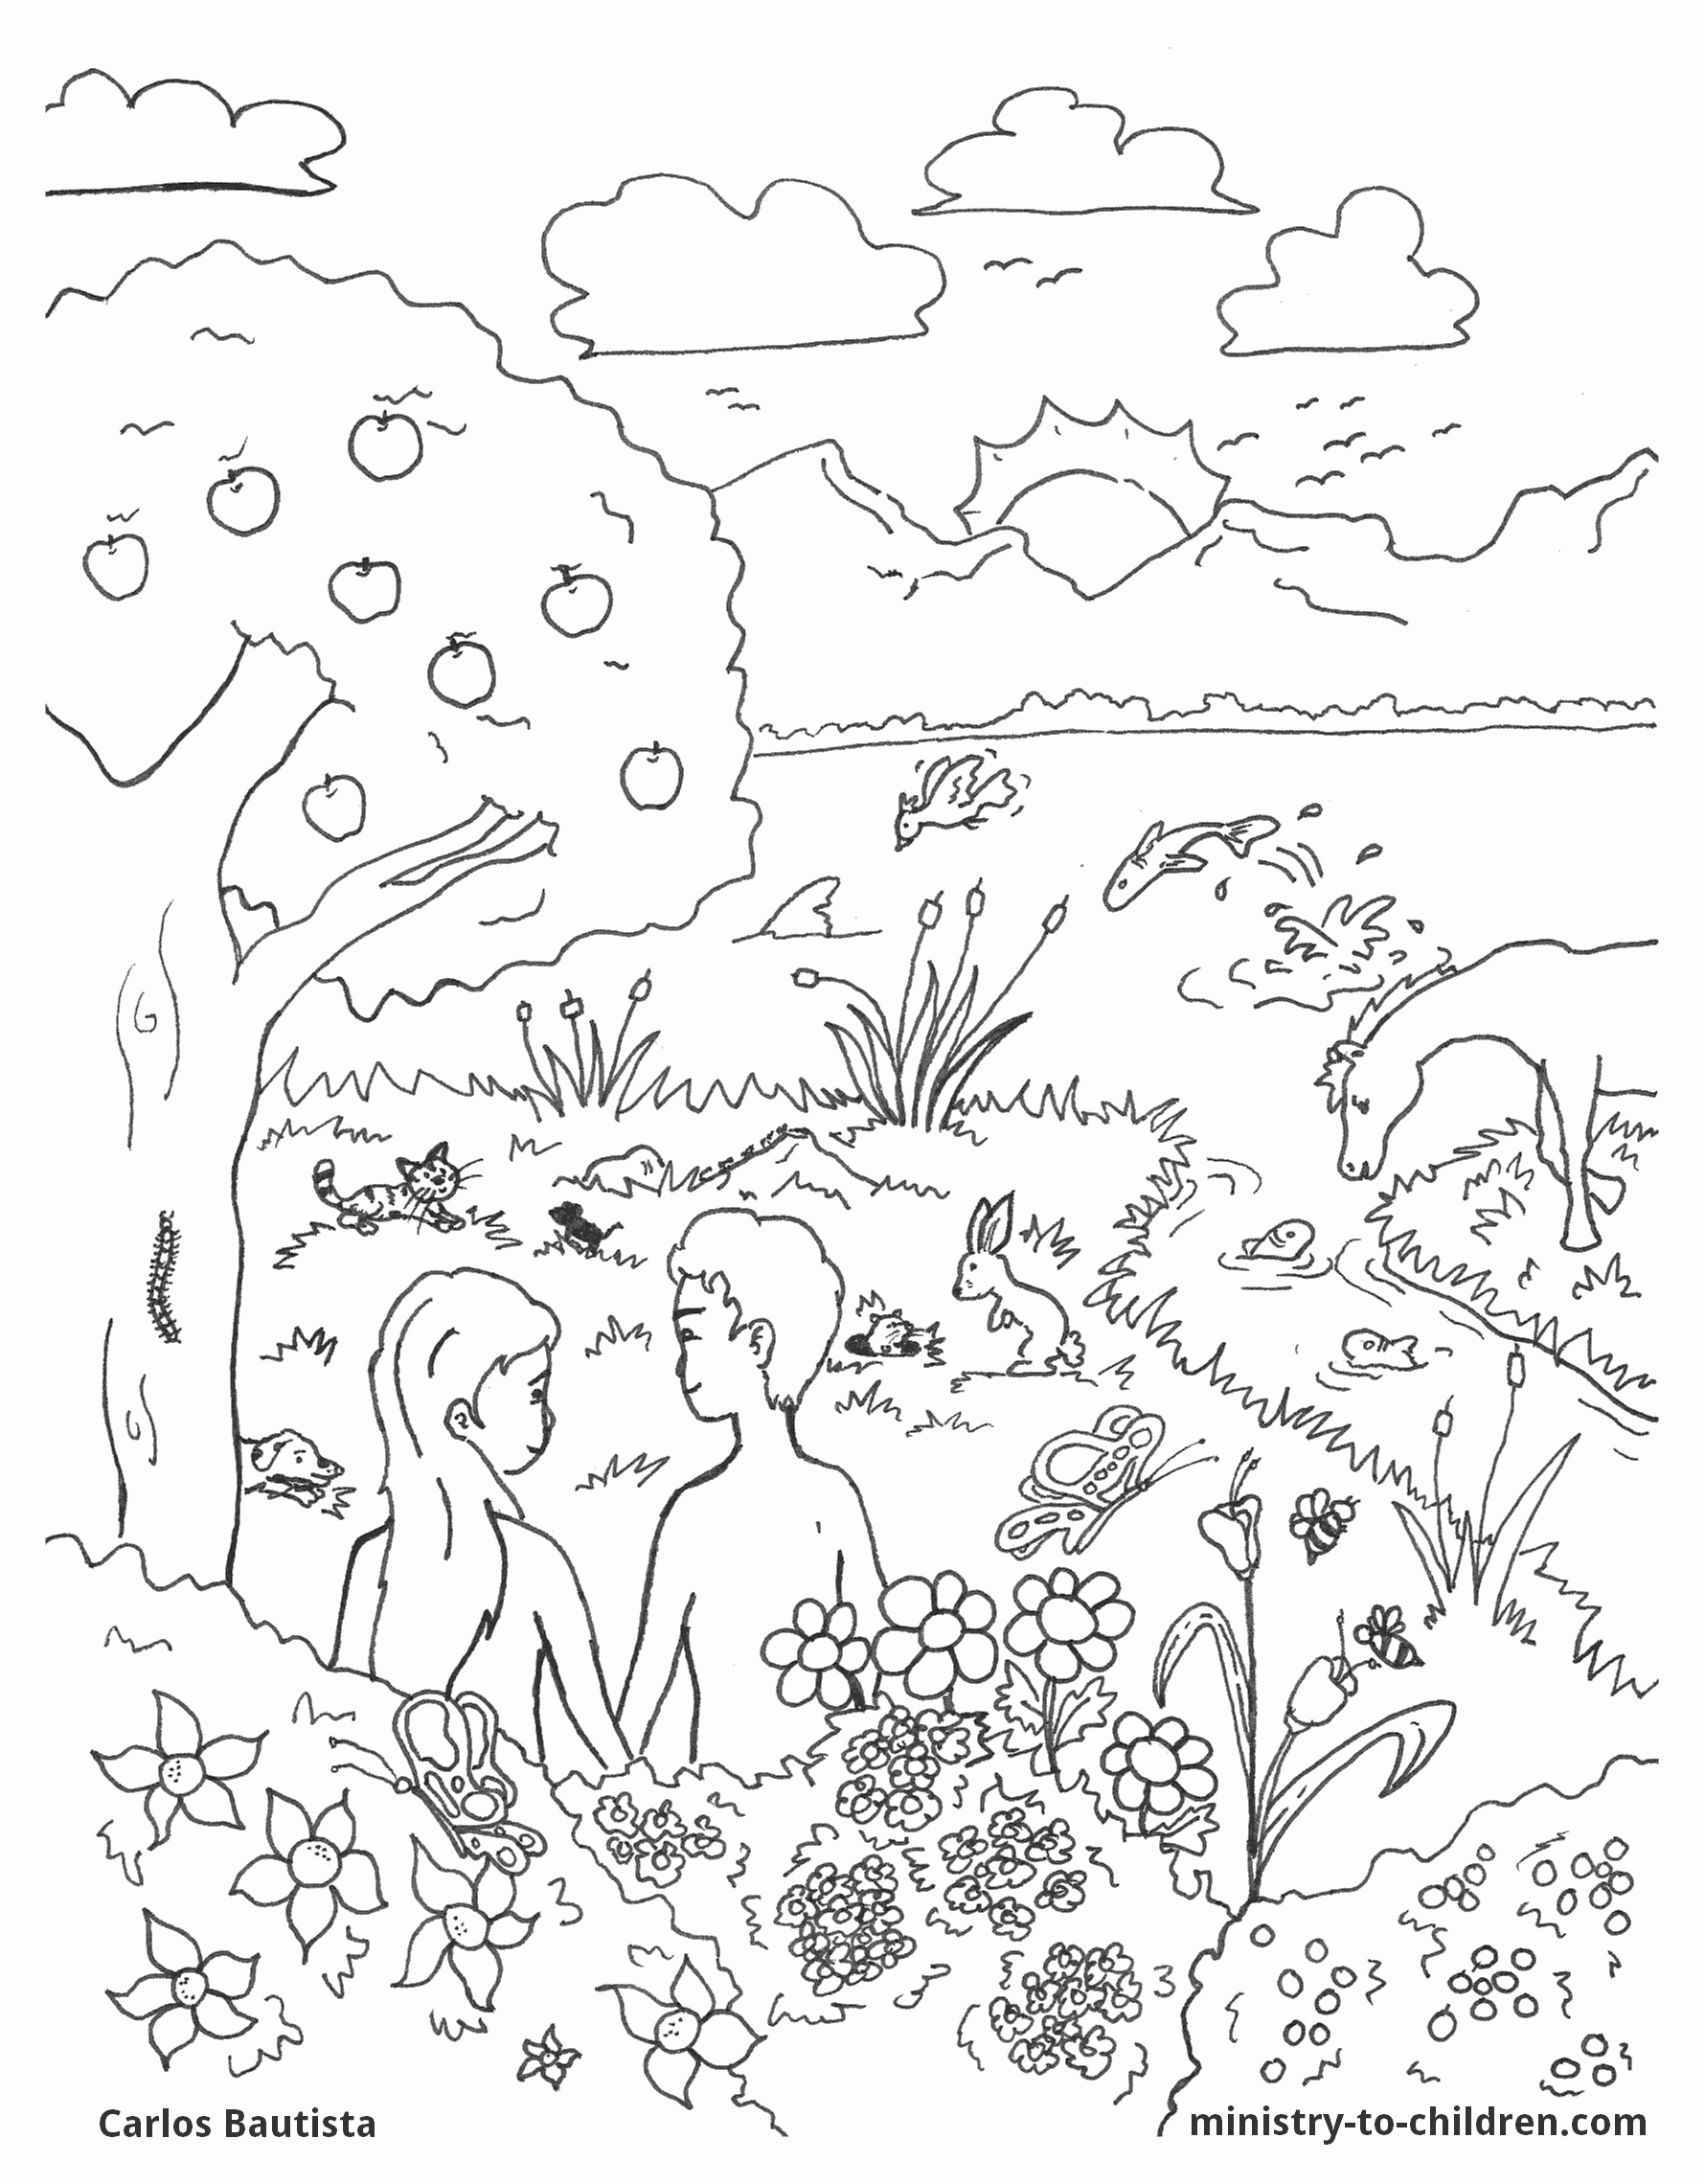 Rahab Bible Story Printable Coloring Pages / Rahab And The Spies